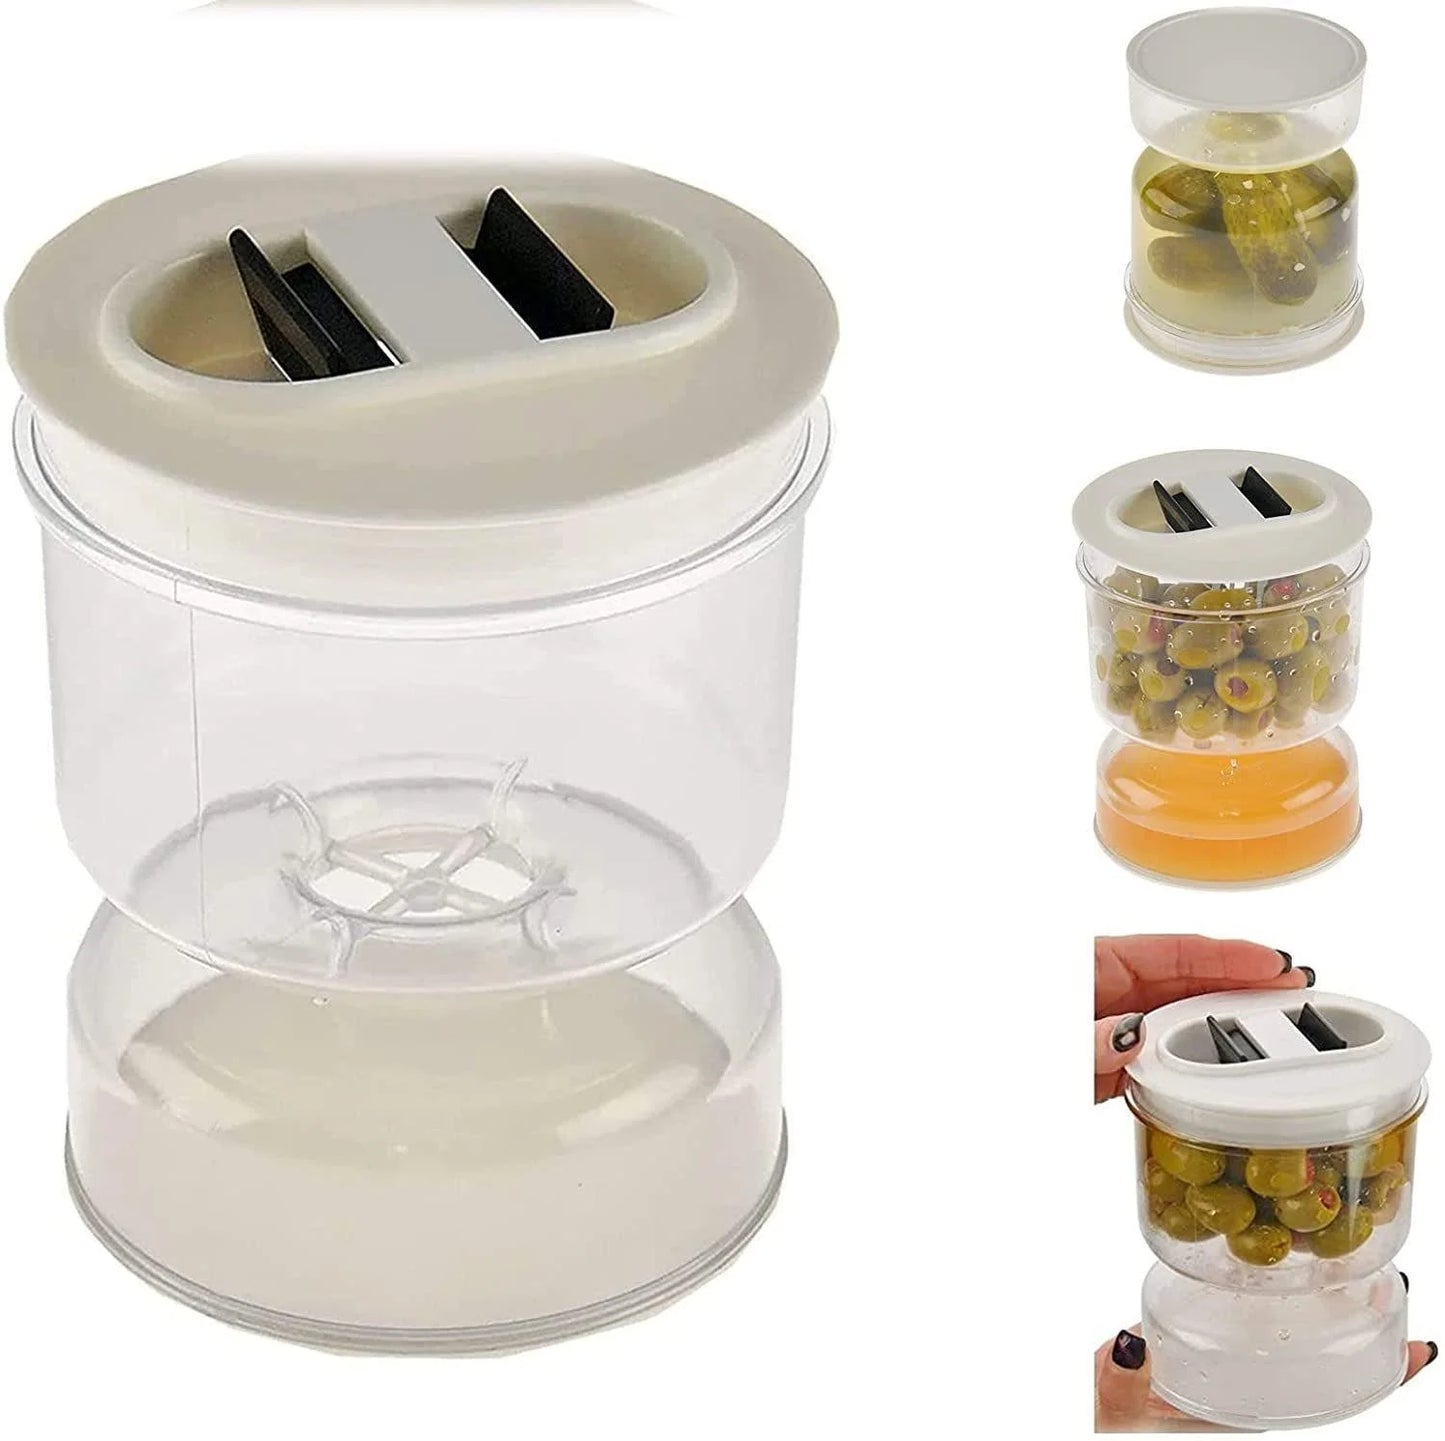 Innovative Pickle Jar with Wet and Dry Separation